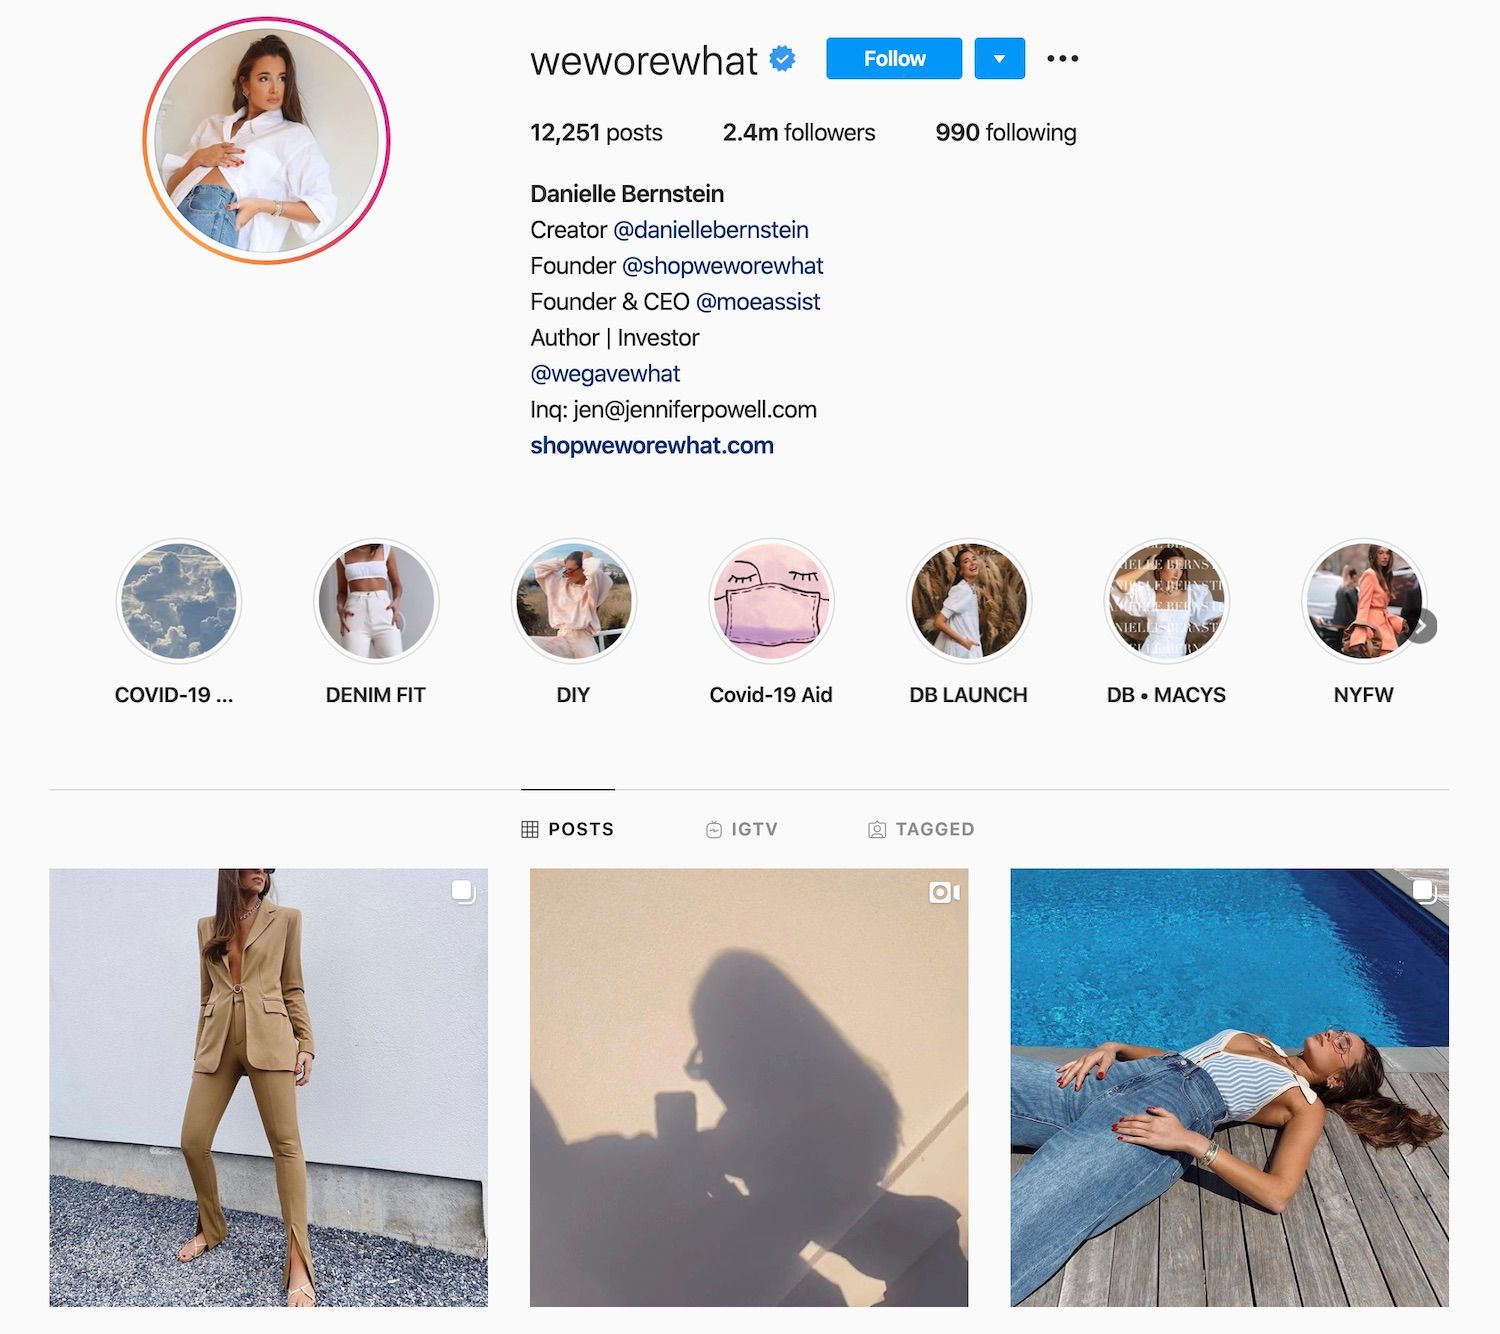 The official Instagram account of Danielle Bernstein's We Wore What has over 2.4 million followers.